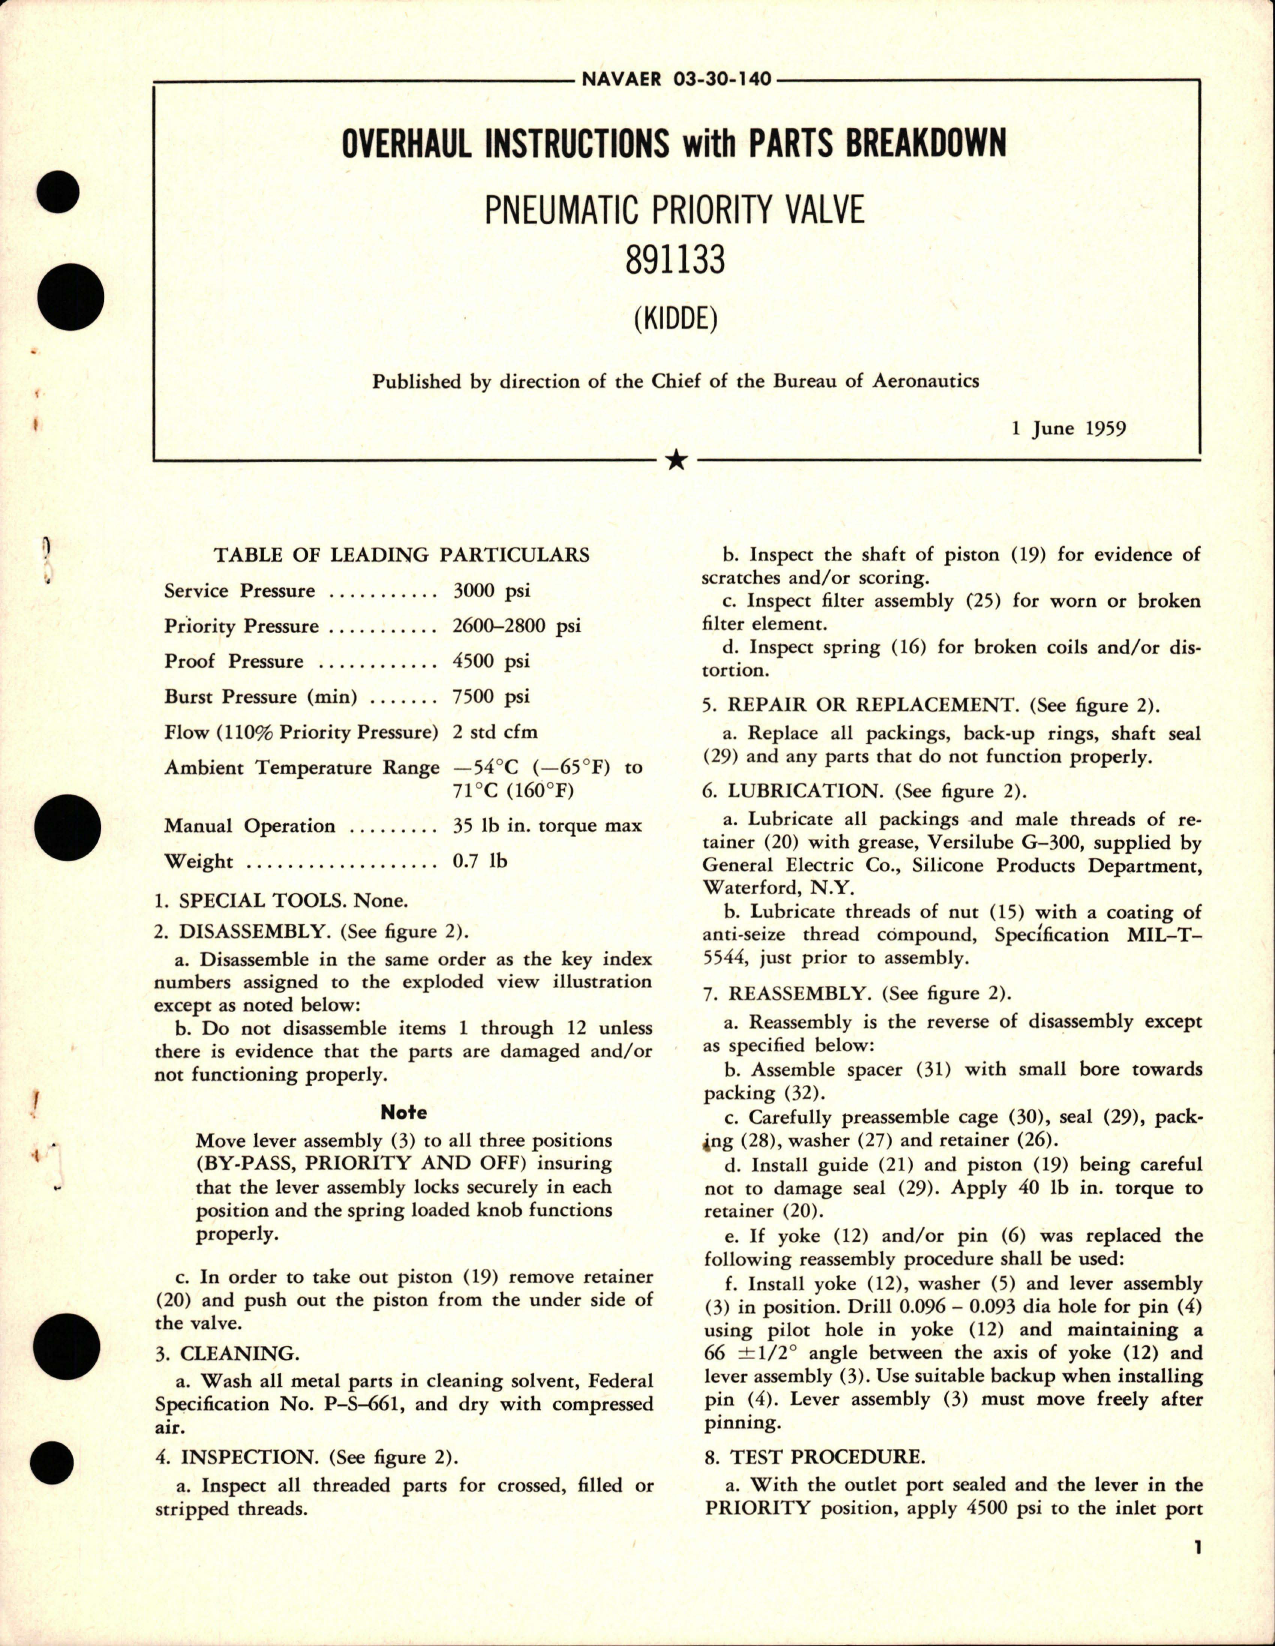 Sample page 1 from AirCorps Library document: Overhaul Instructions with Parts Breakdown for Pneumatic Priority Valve - 891133 